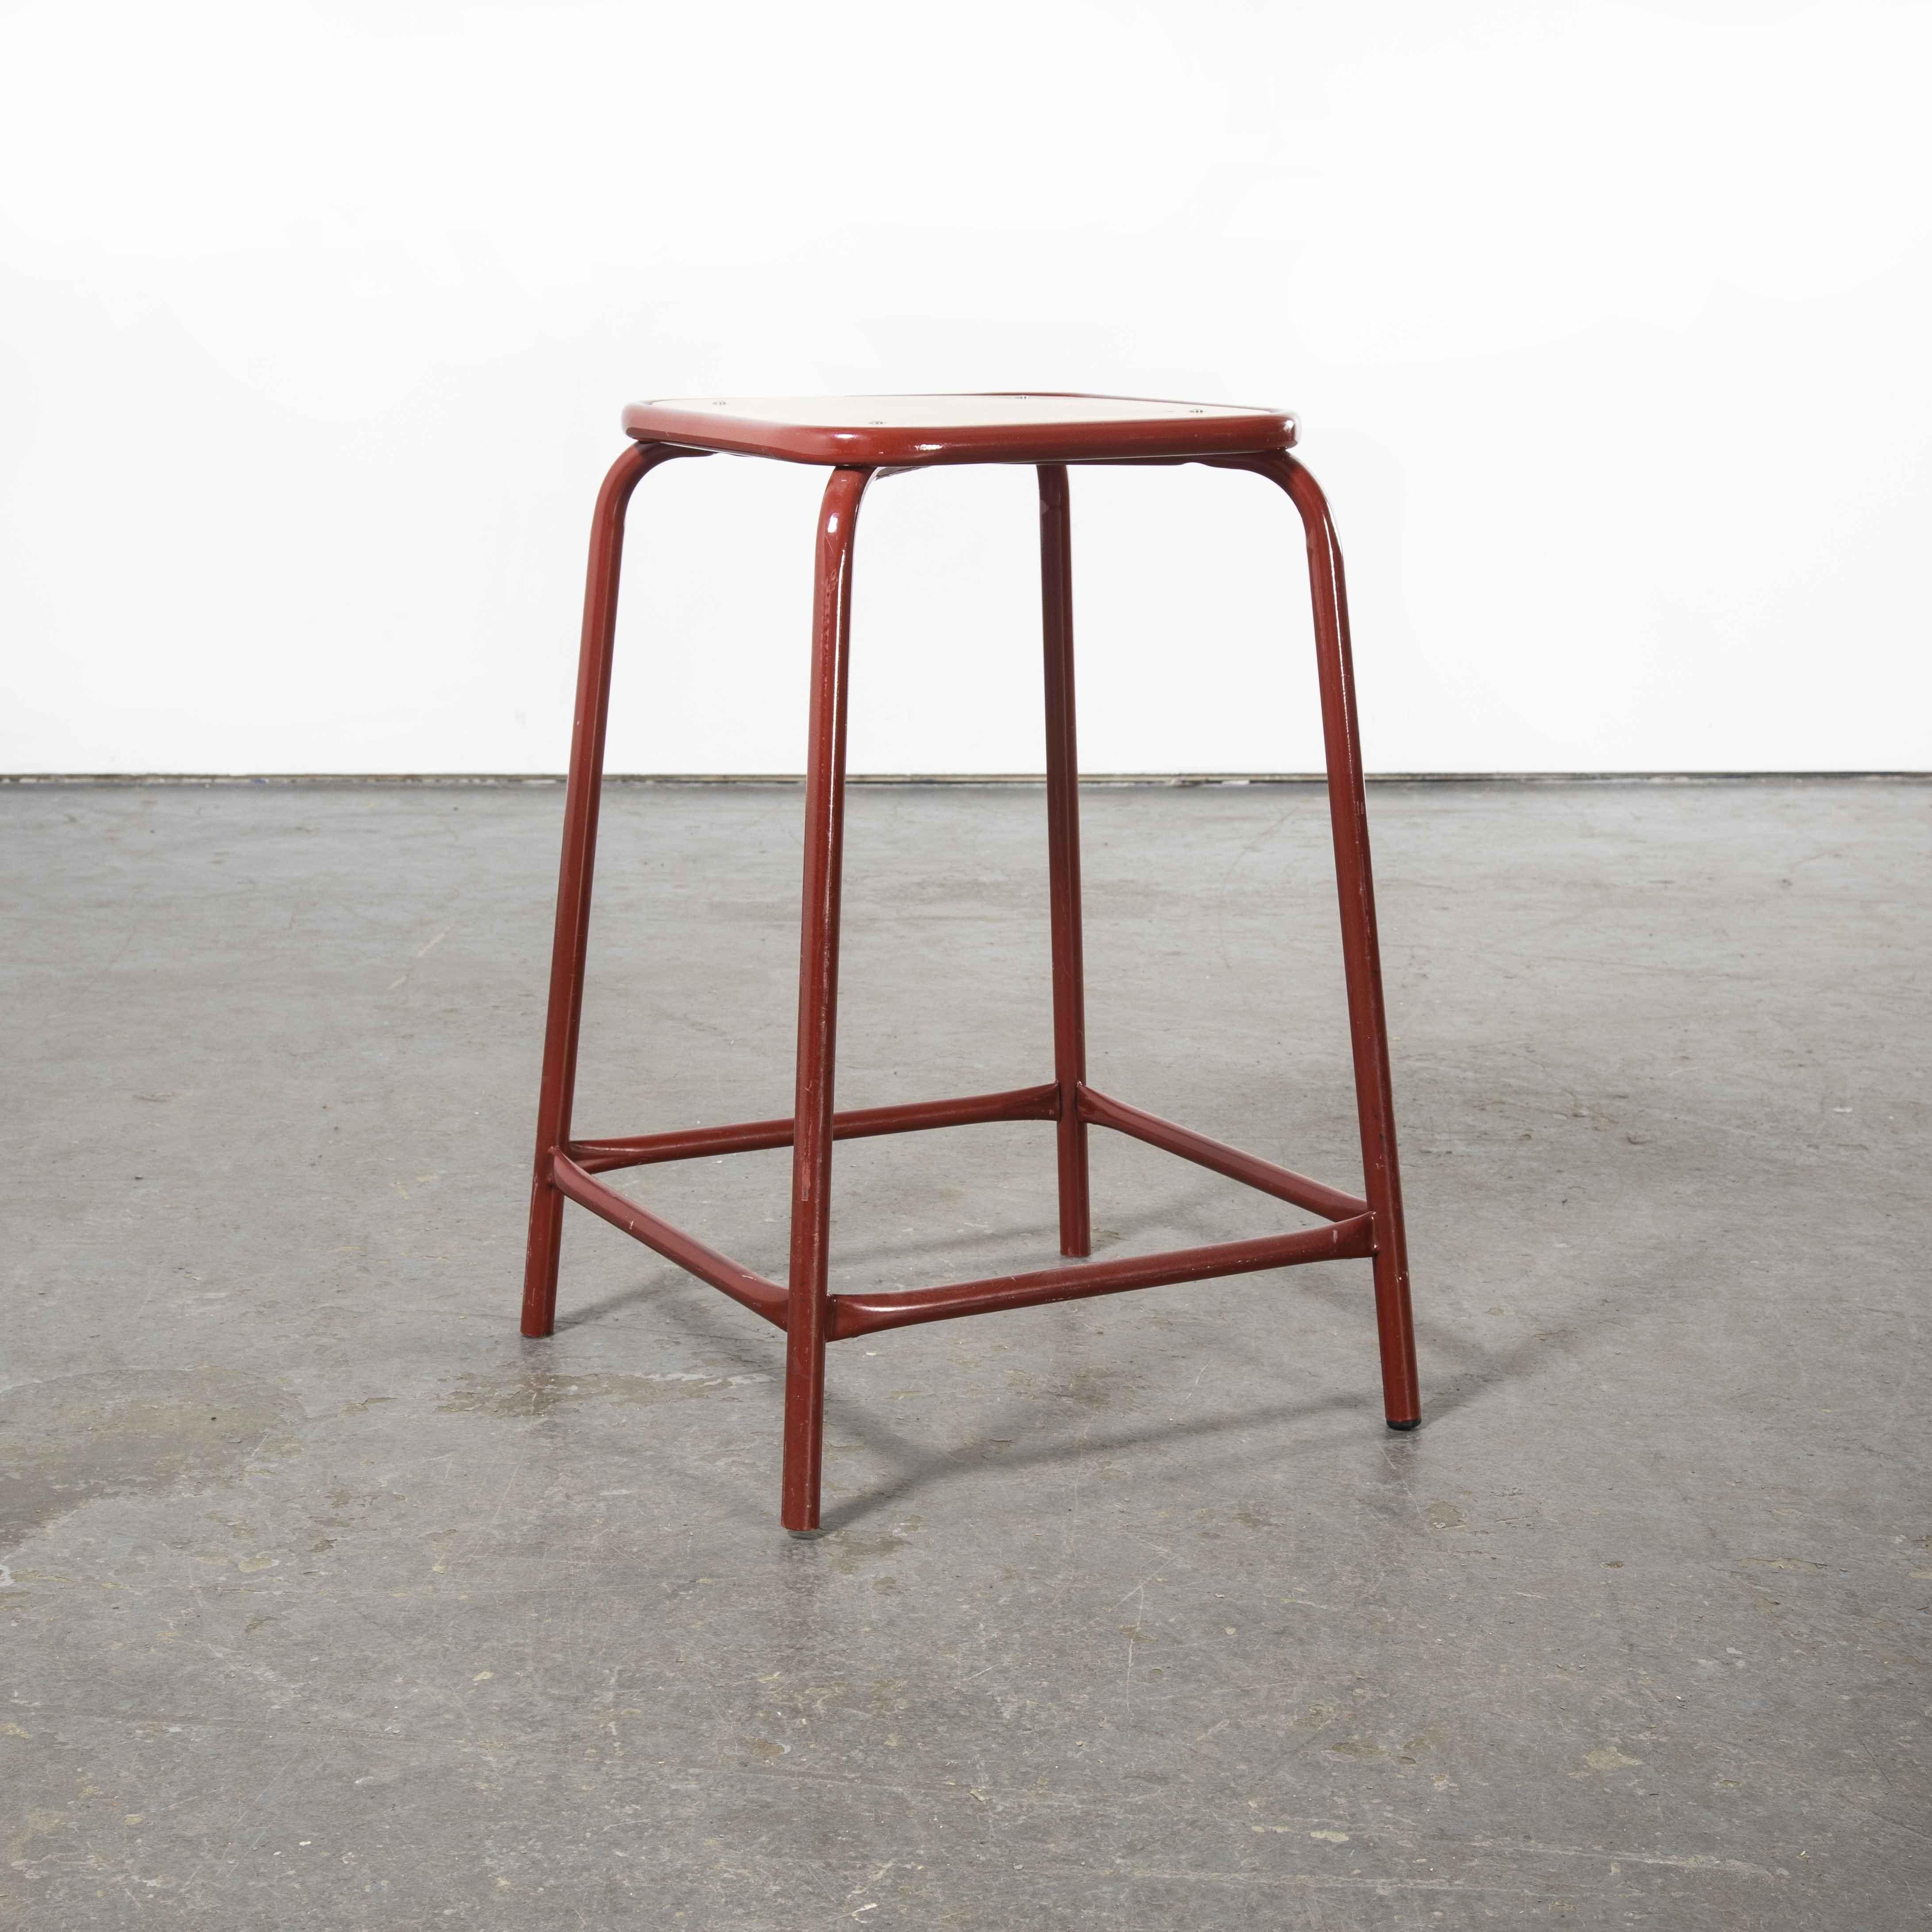 1970’s French dark red laboratory stools – set of twelve

1970’s French dark red laboratory stools – set of twelve. Good honest lab stools, heavy steel frames with solid heavy birch ply seats. We clean them and check all fixings, they are good to